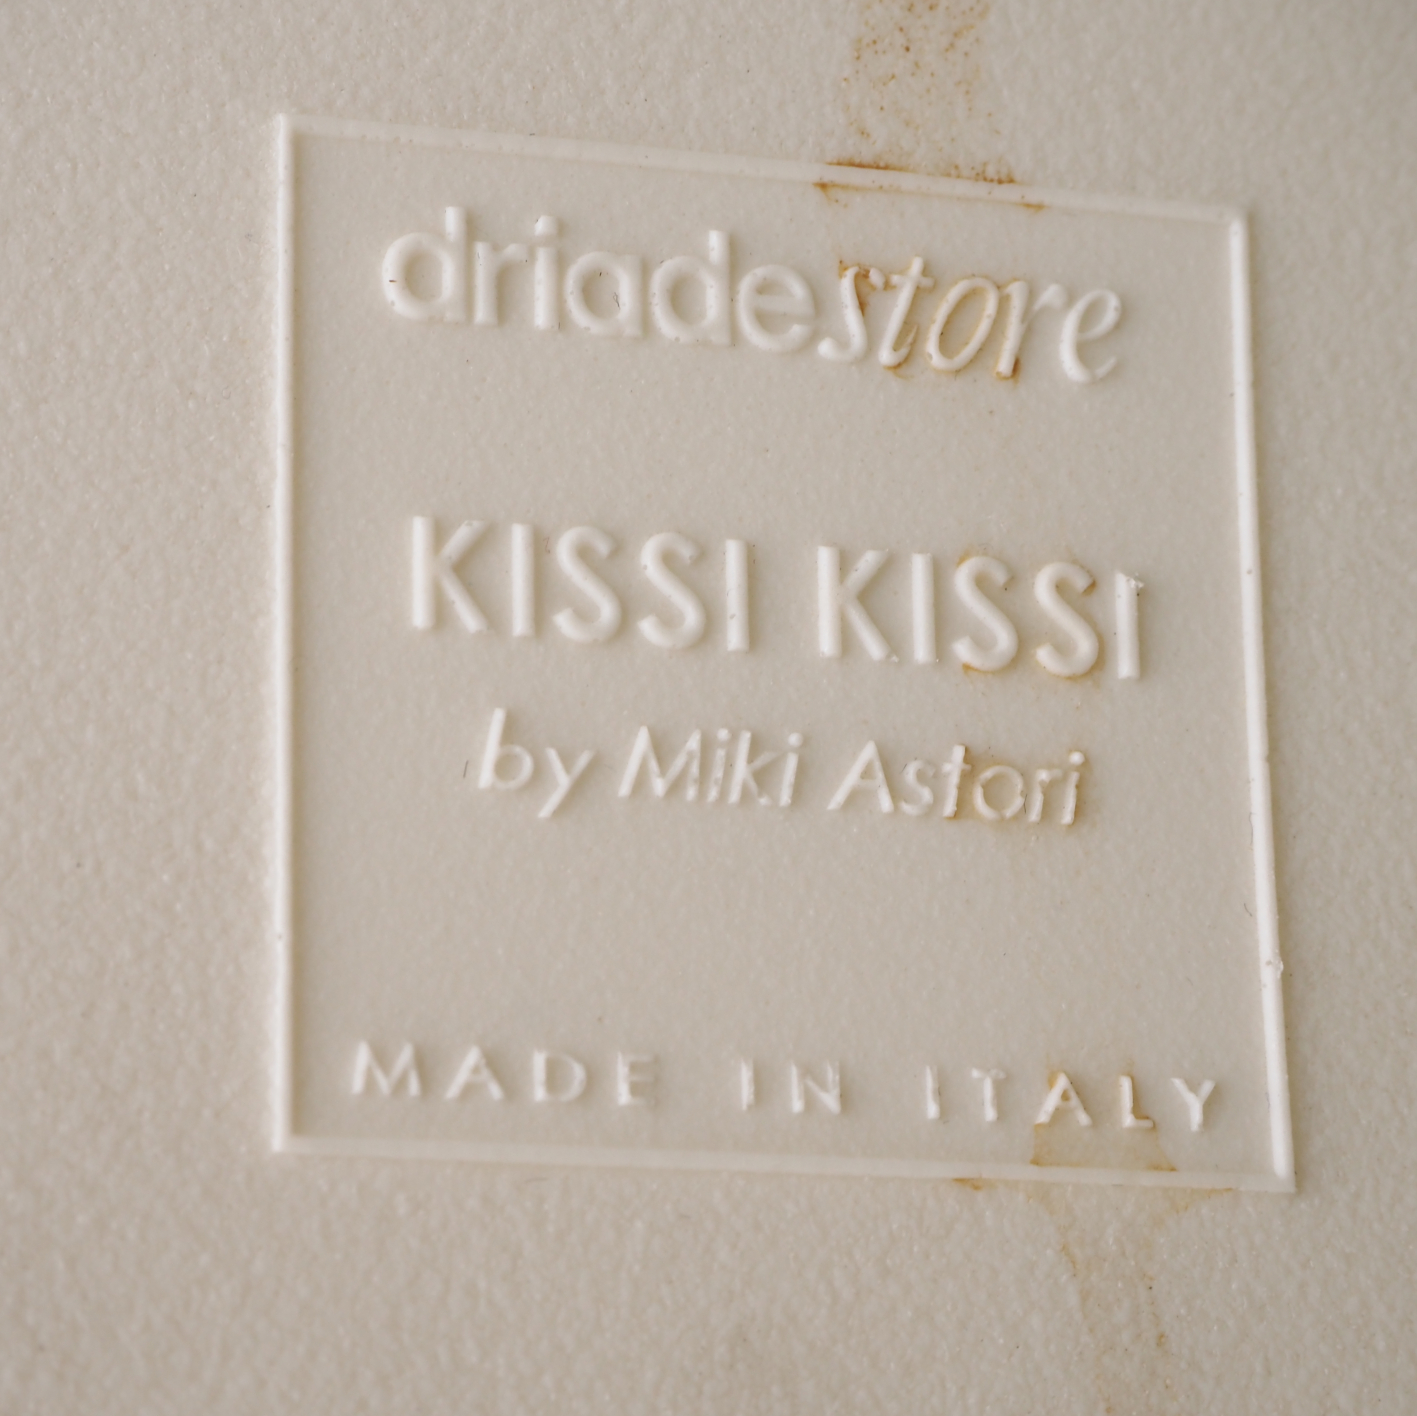 Round table 'Kissi Kissi' by Miki Astori for Driade (ca. 2004)